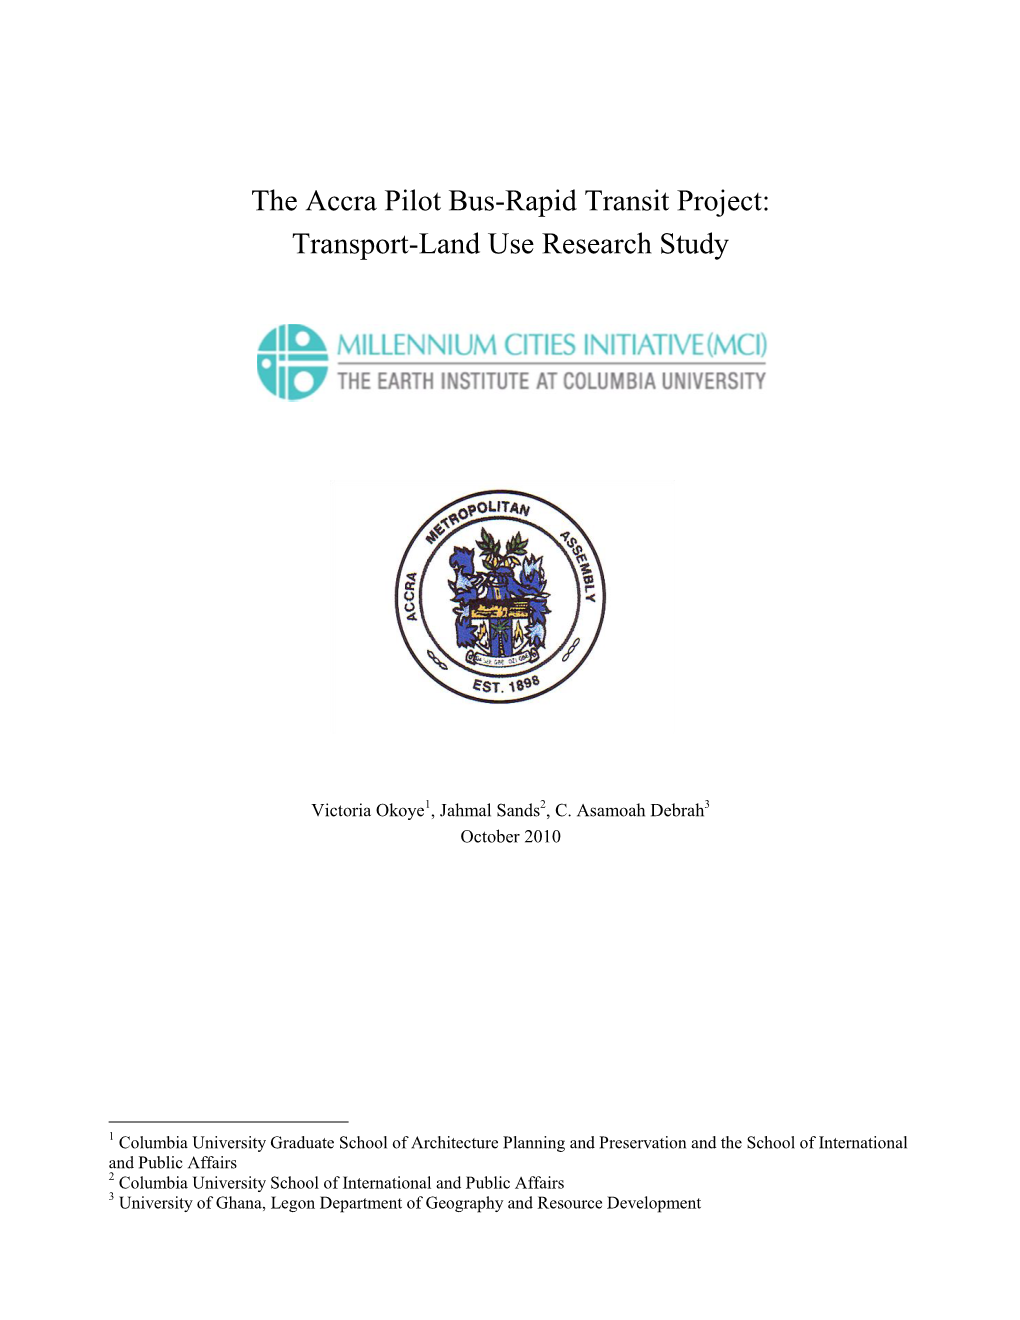 Transport-Land Use Research Study